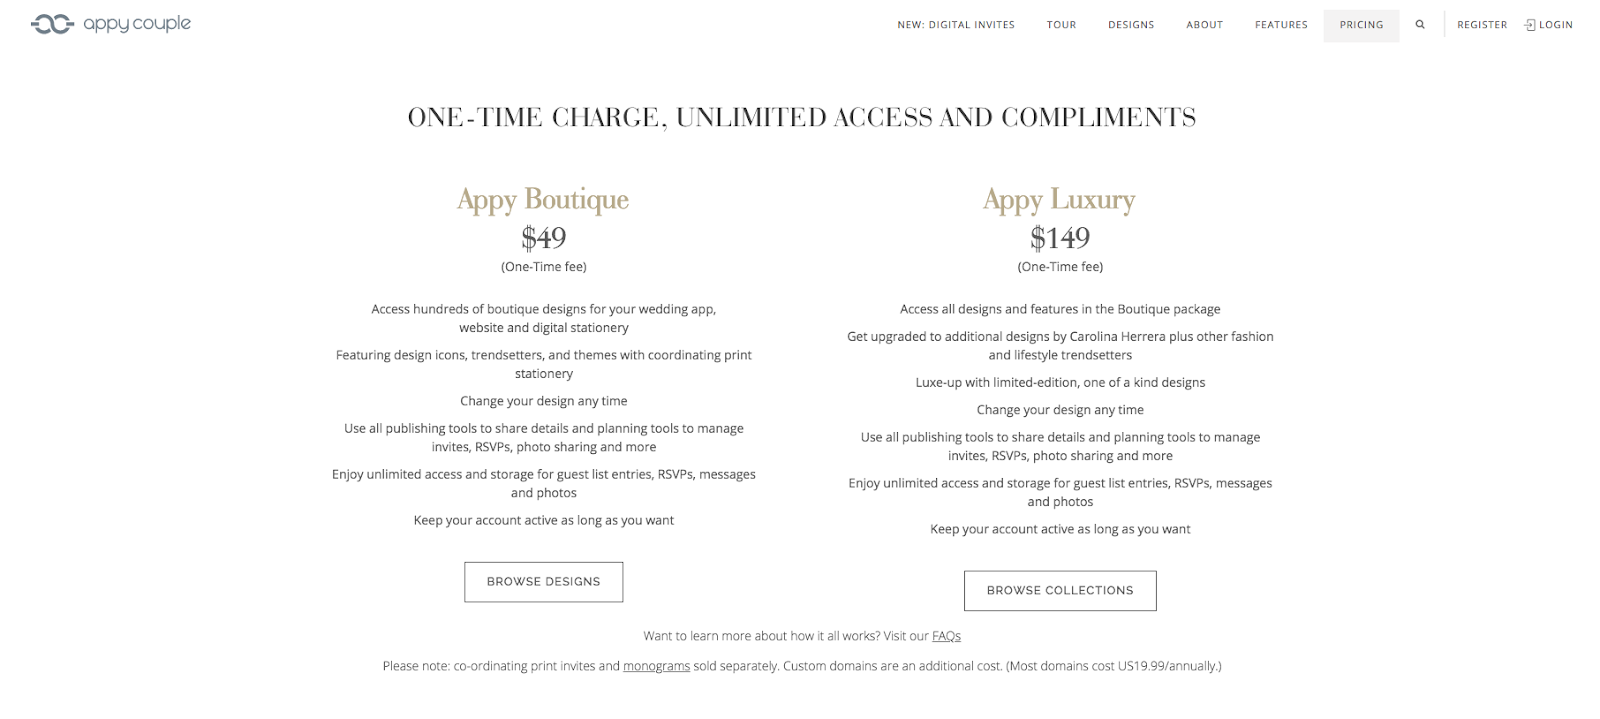 appy couple pricing page